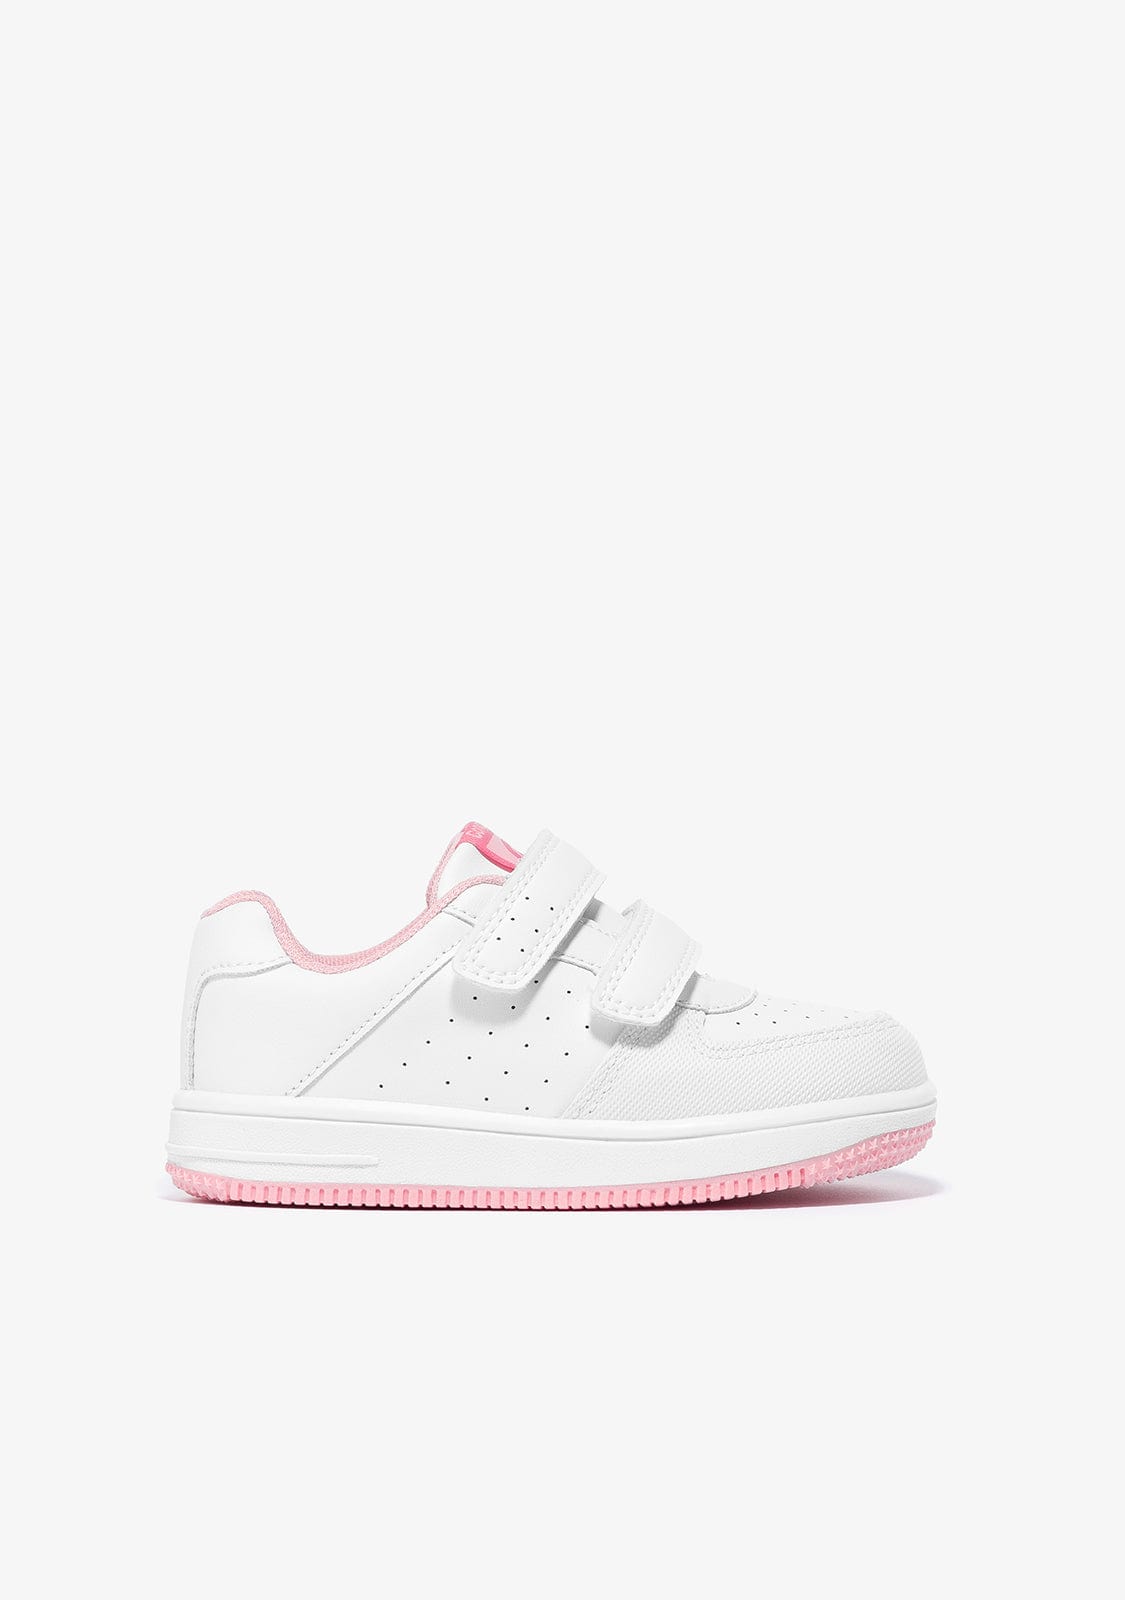 Conguitos Shoes Unisex White / Pink Trainers